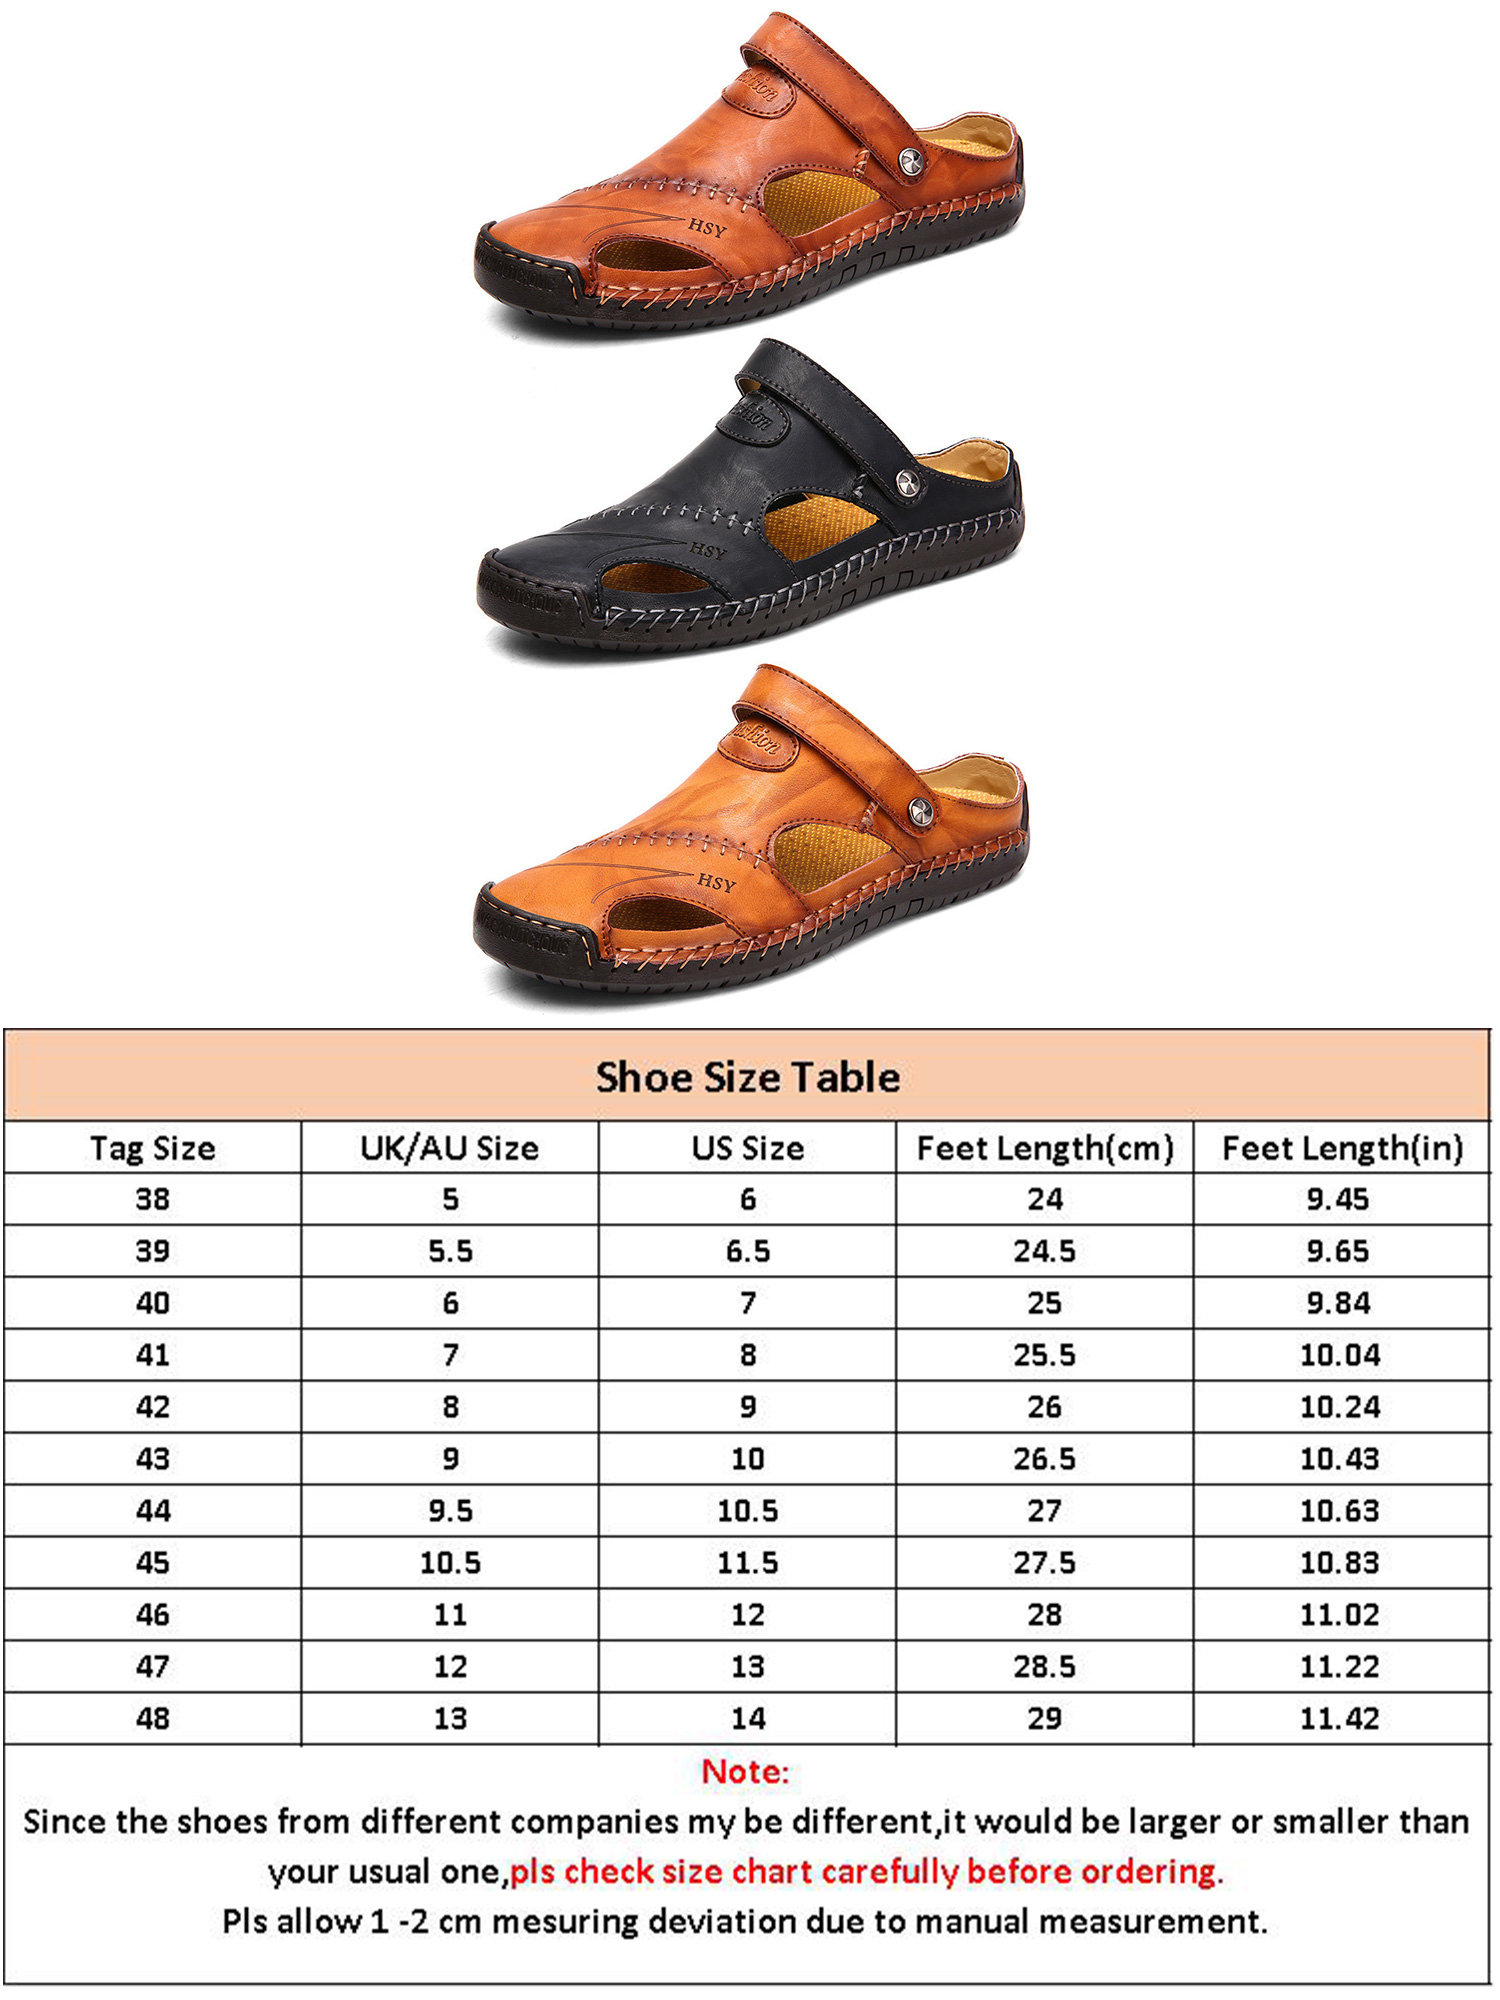 Frontwalk Mens Summer Sandals Casual Leather Shoes Outdoor Beach Breathable Casual Shoes - image 3 of 5